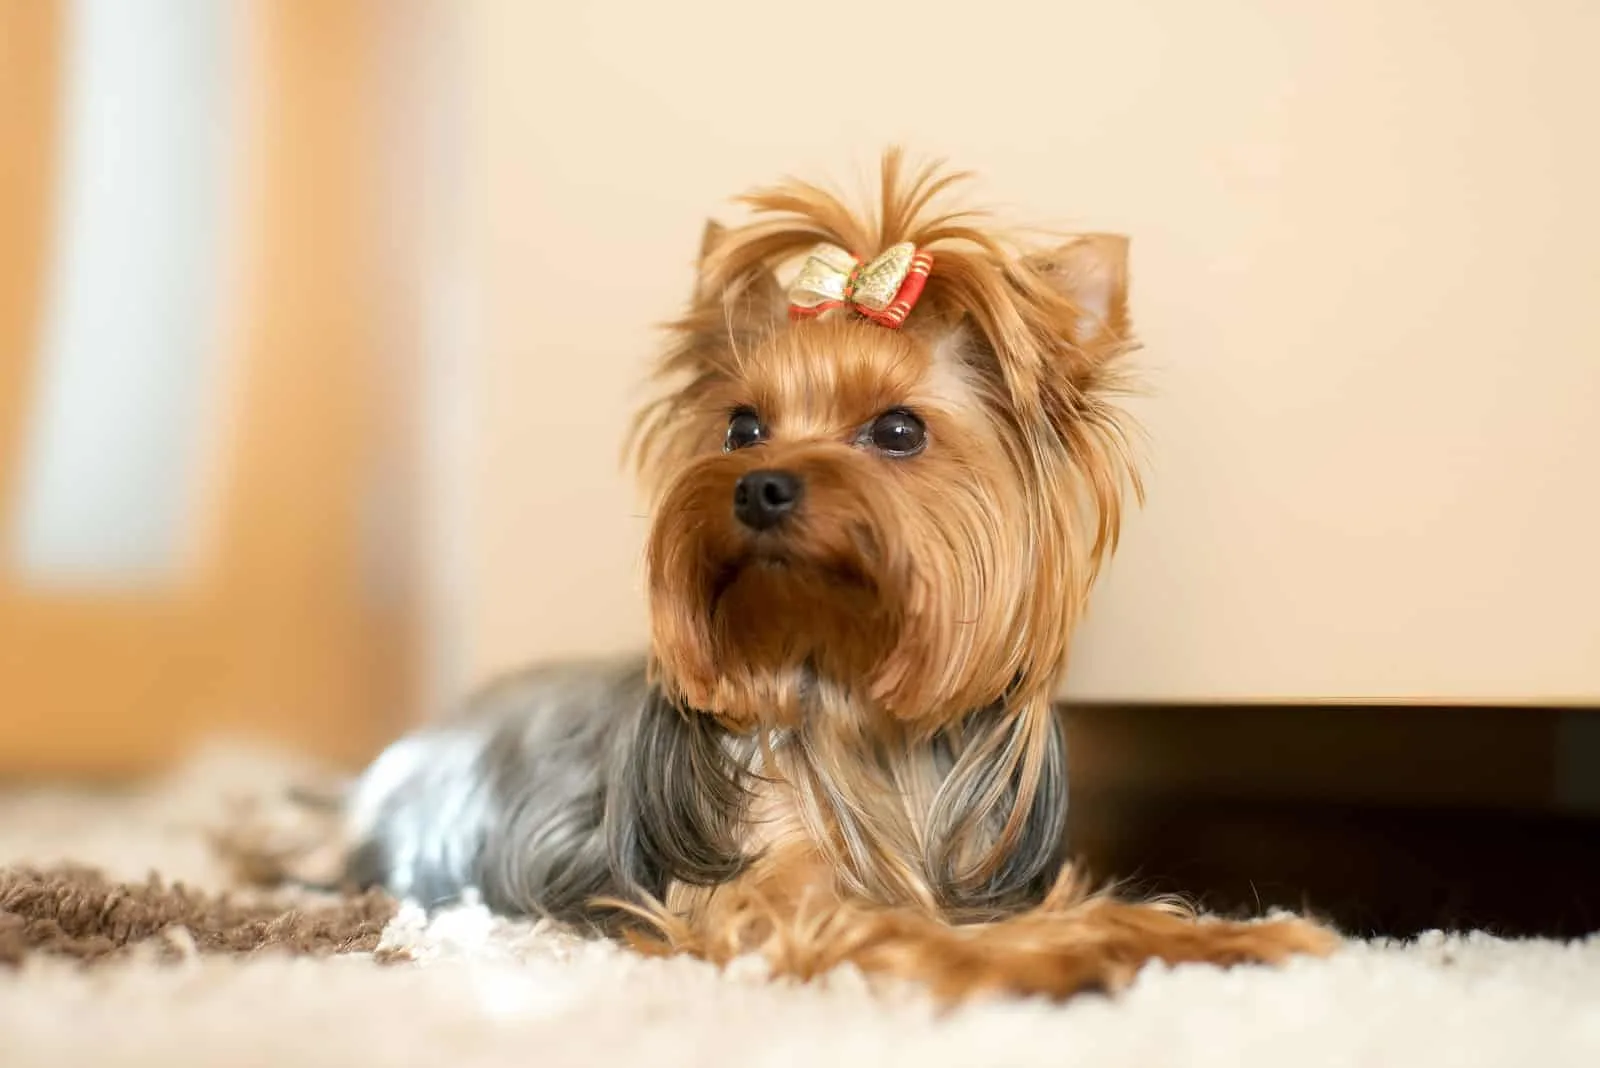 The Yorkshire terrier lies on a shaggy mat on the floor of the room